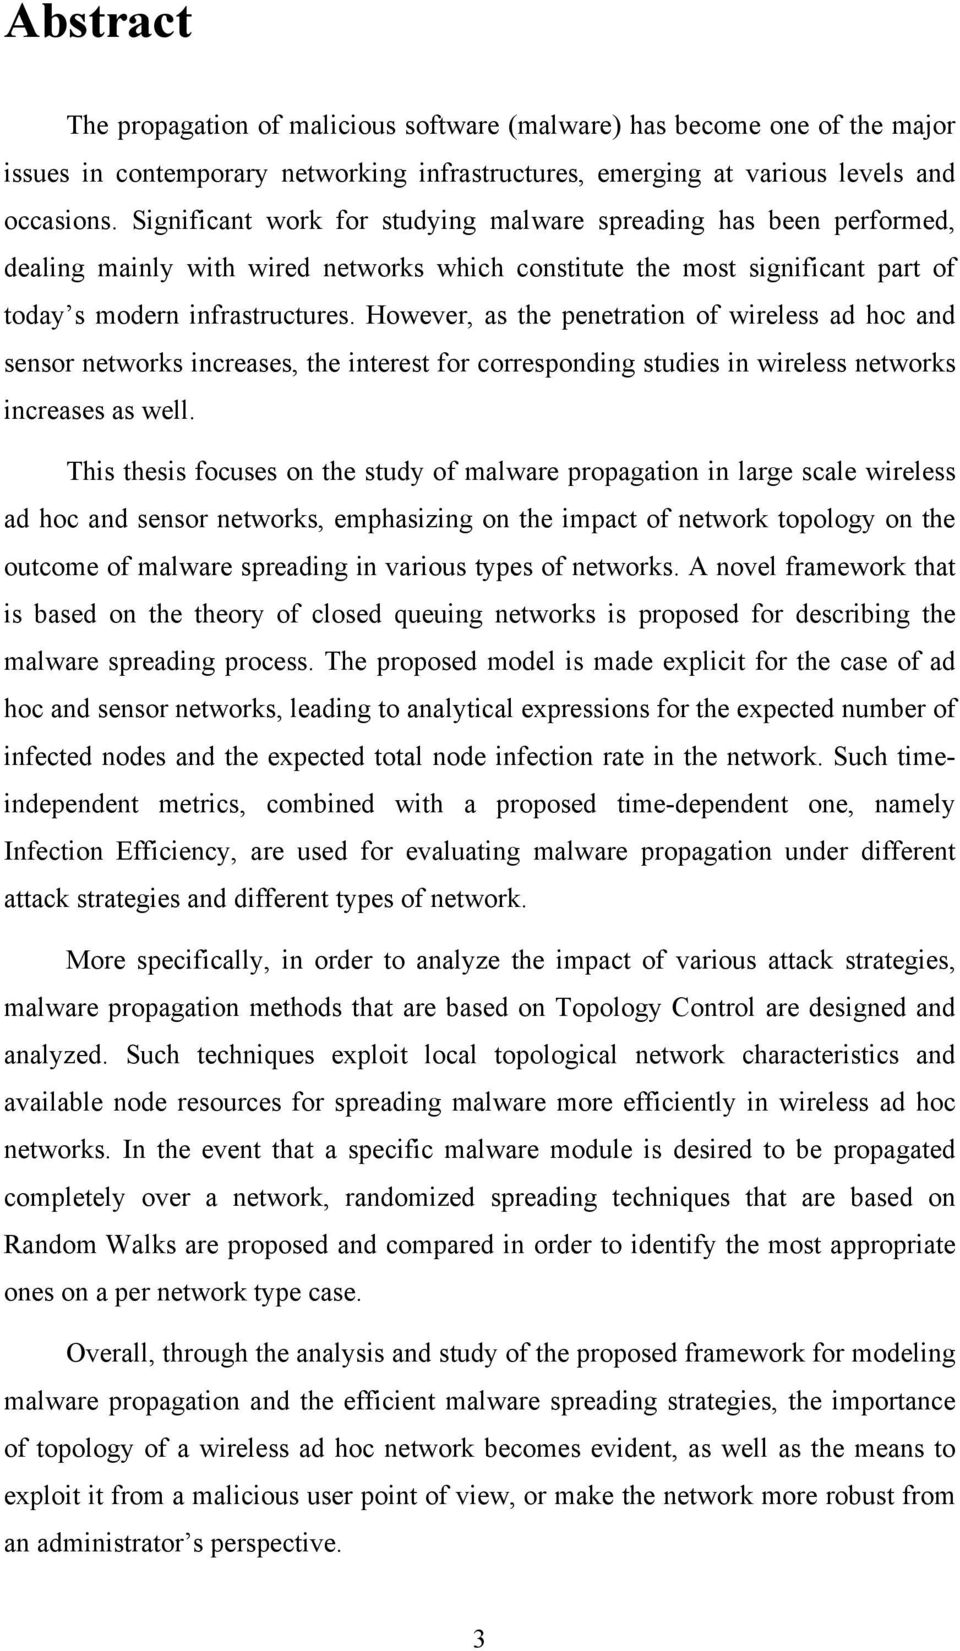 However, as the penetration of wireless ad hoc and sensor networks increases, the interest for corresponding studies in wireless networks increases as well.